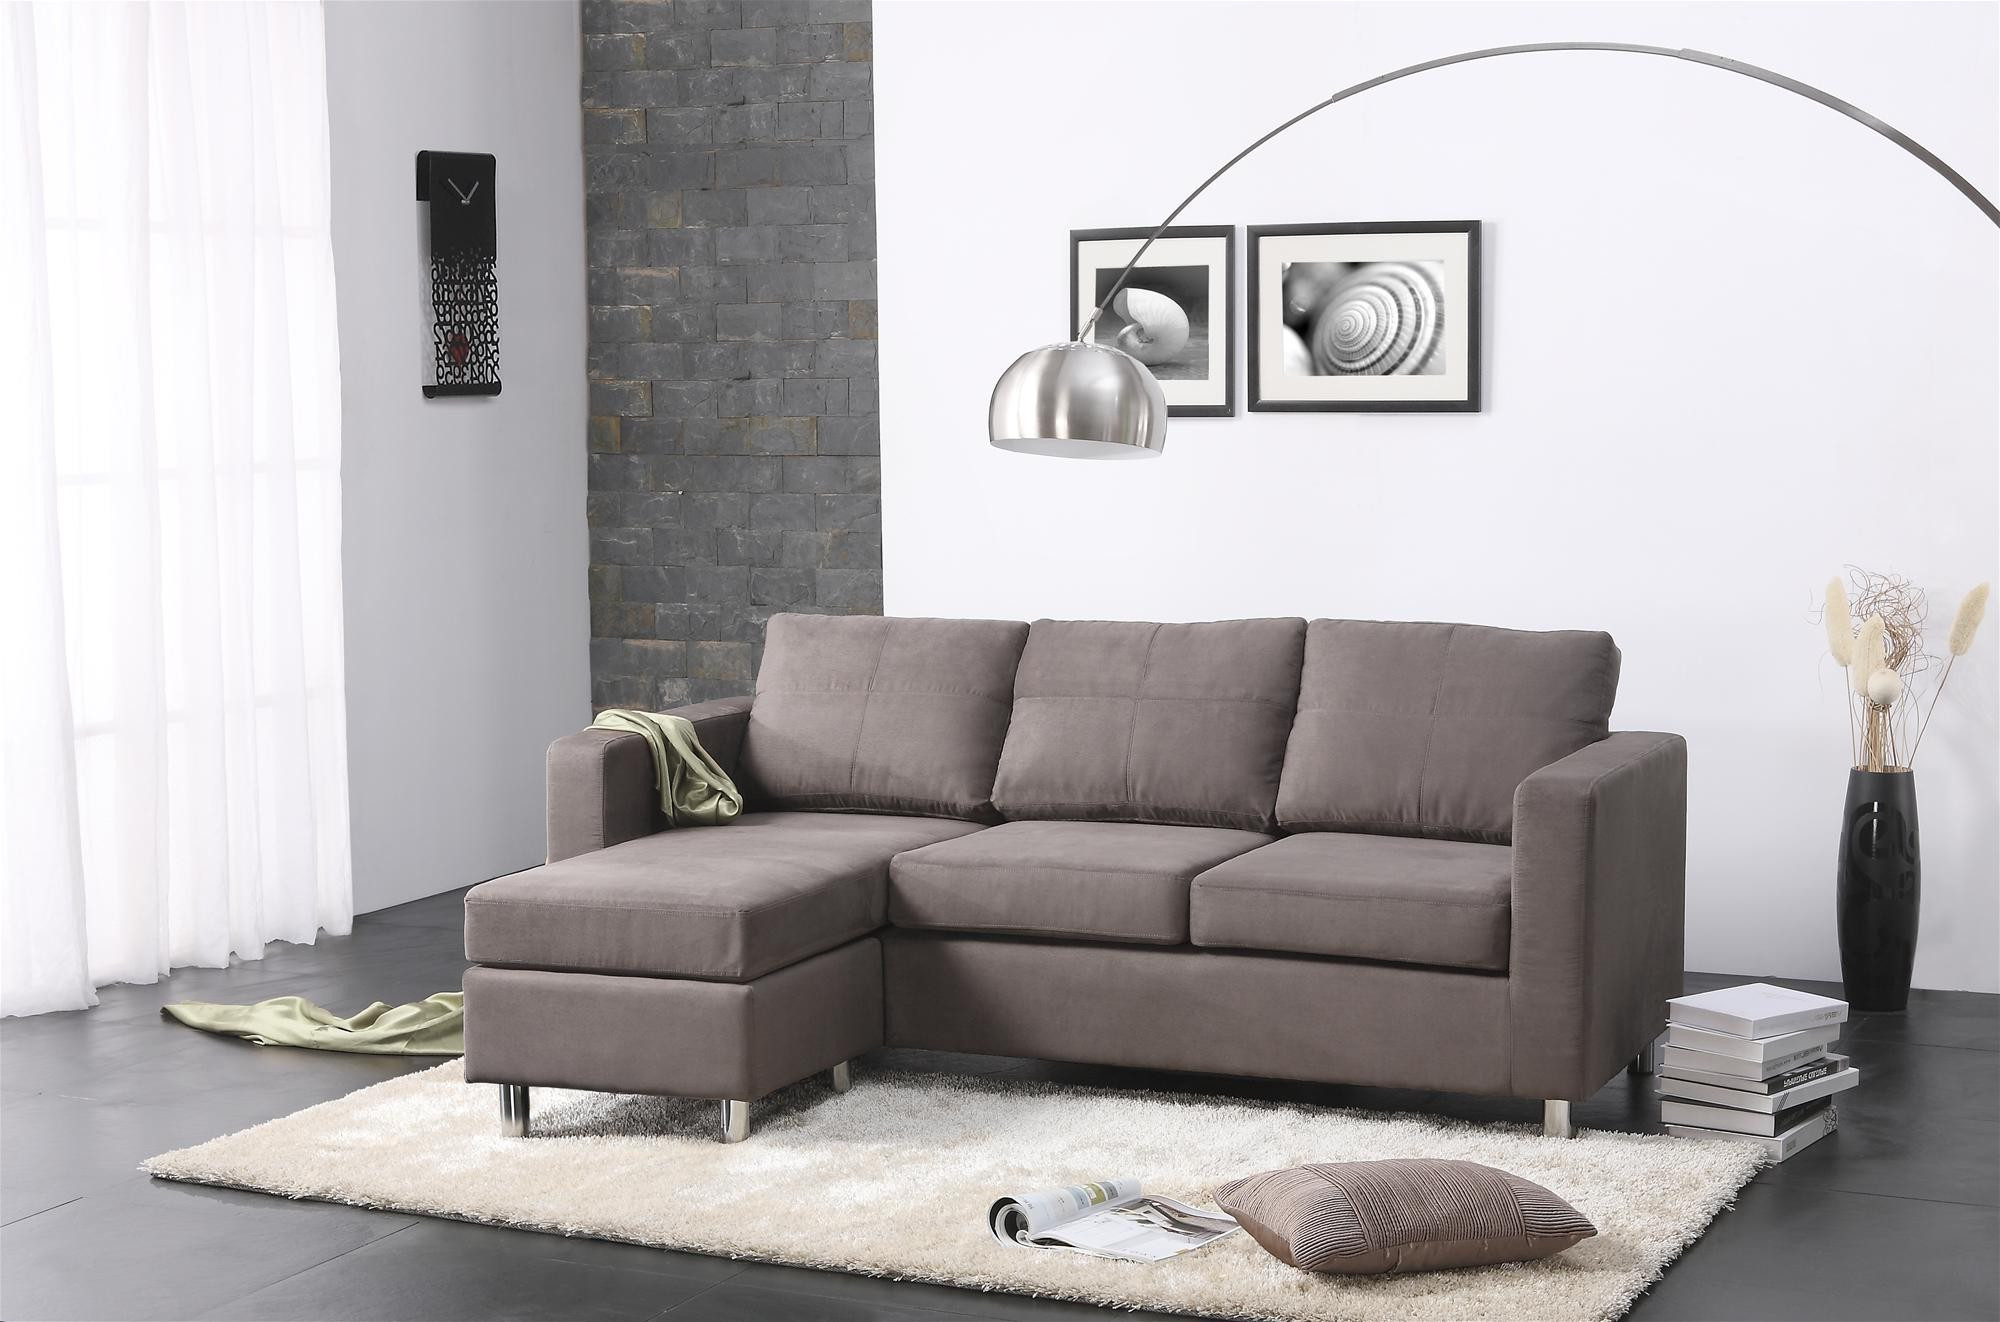 Sofa For Small Living Room
 Living Rooms with Sectionals Sofa for Small Living Room